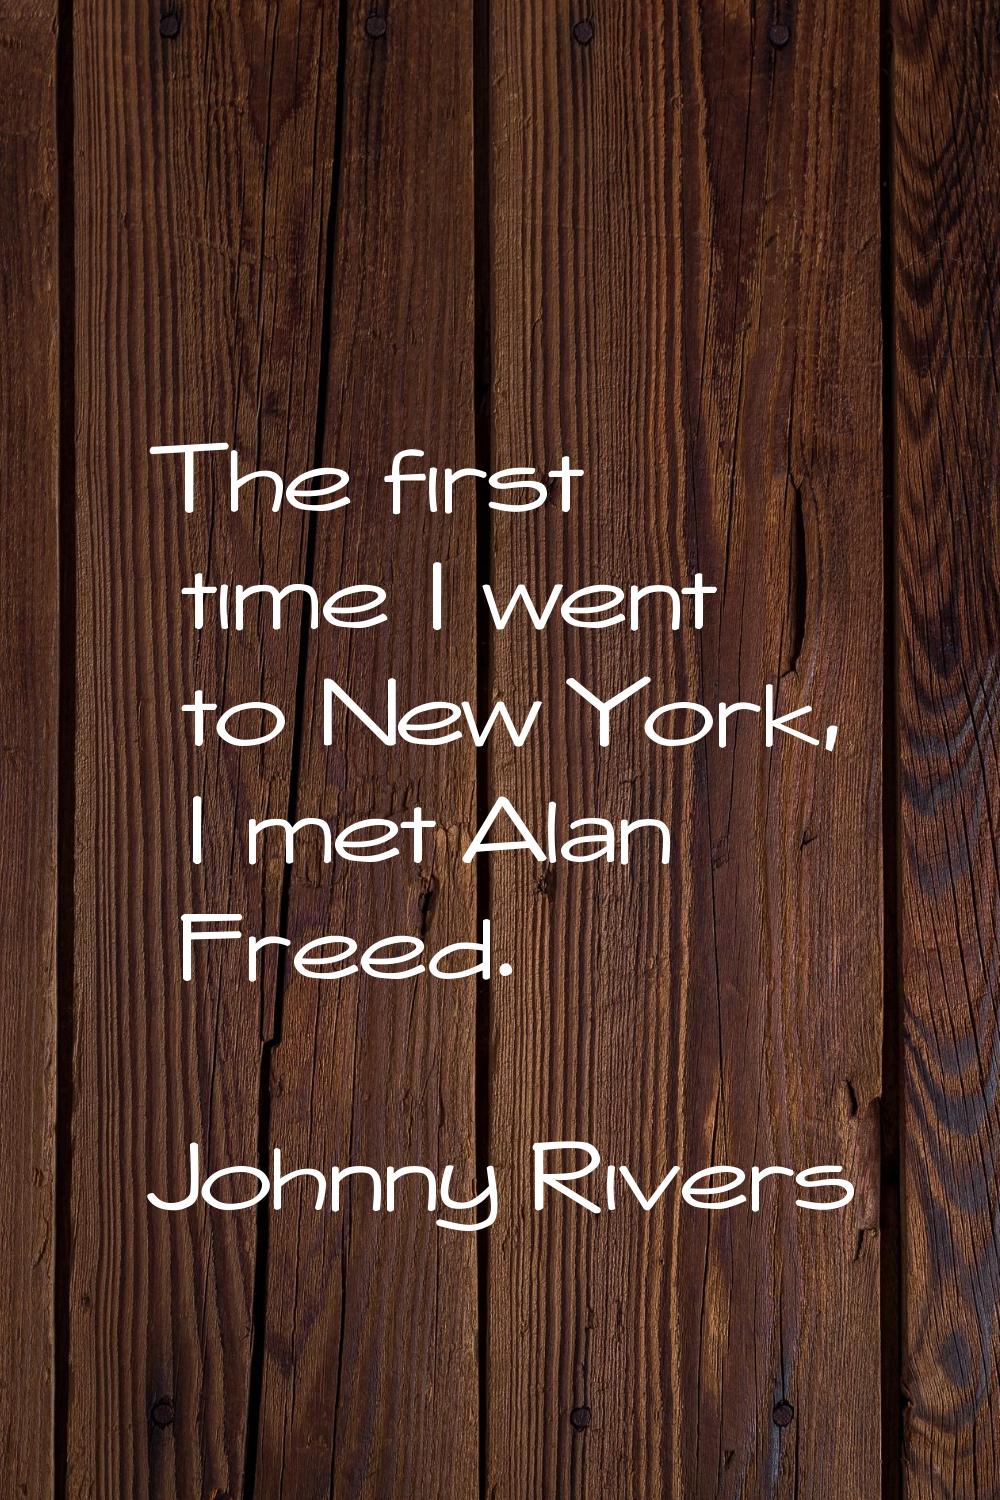 The first time I went to New York, I met Alan Freed.